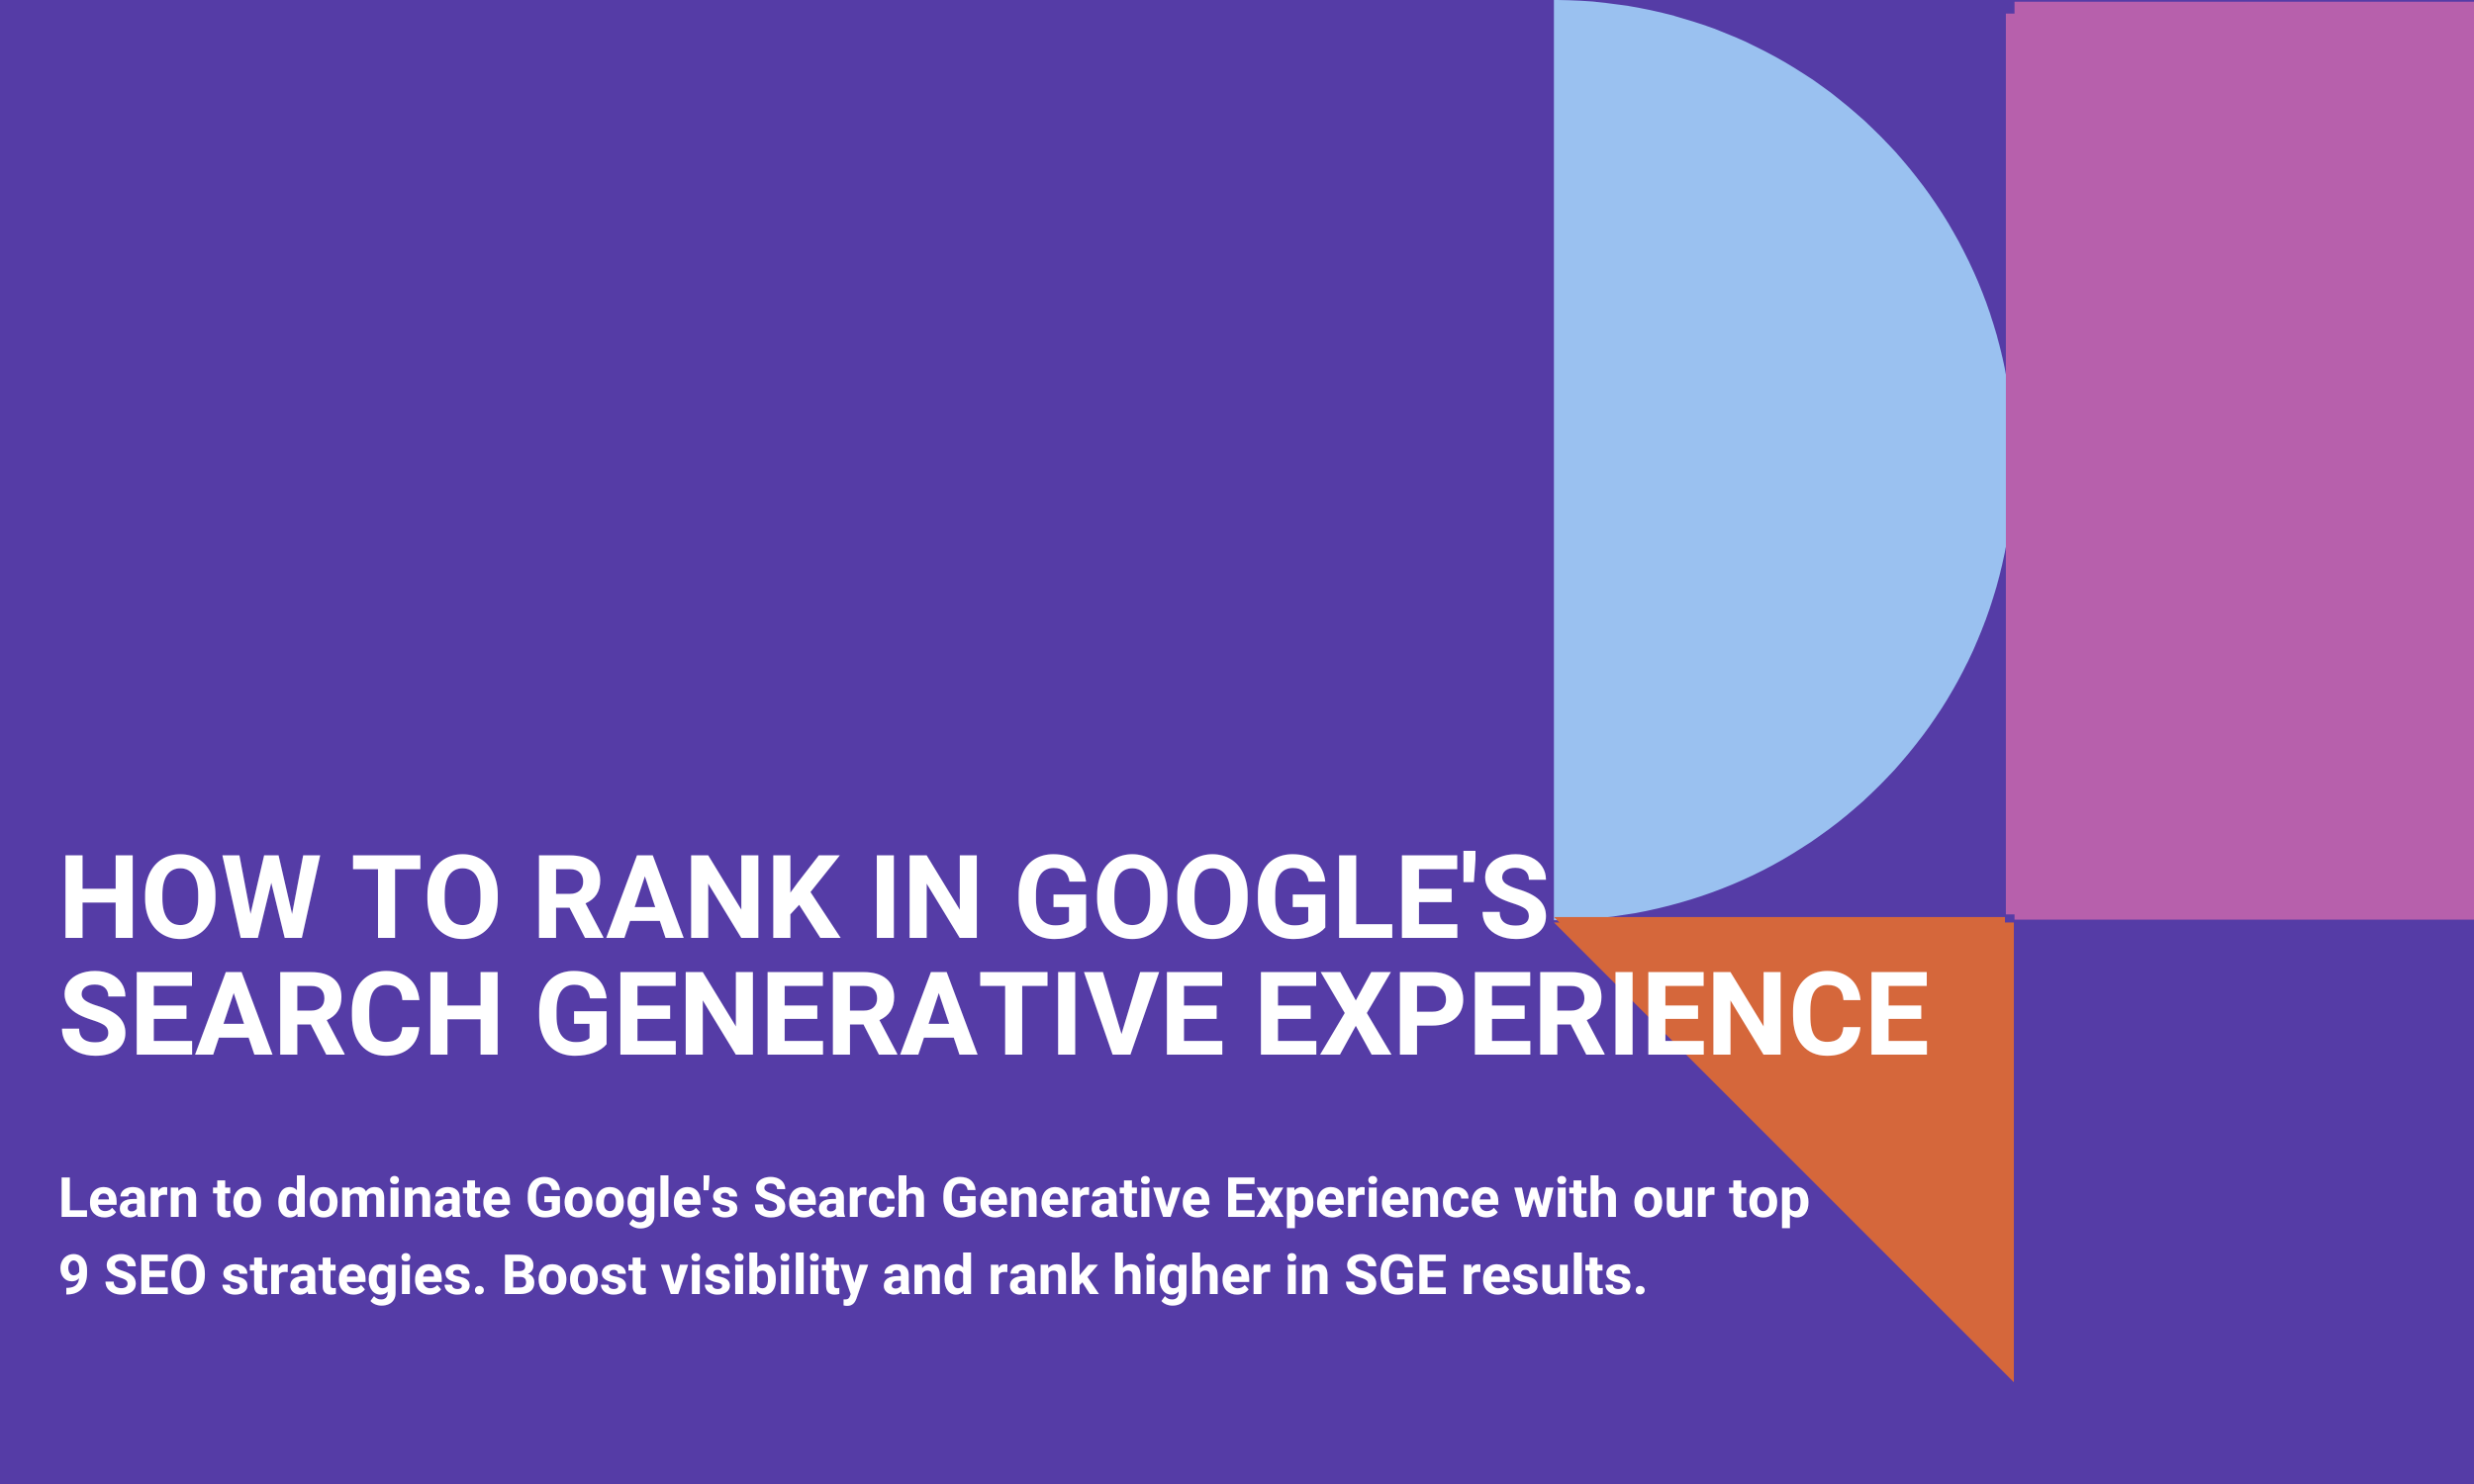 How to Rank in Google's Search Generative Experience (SGE)